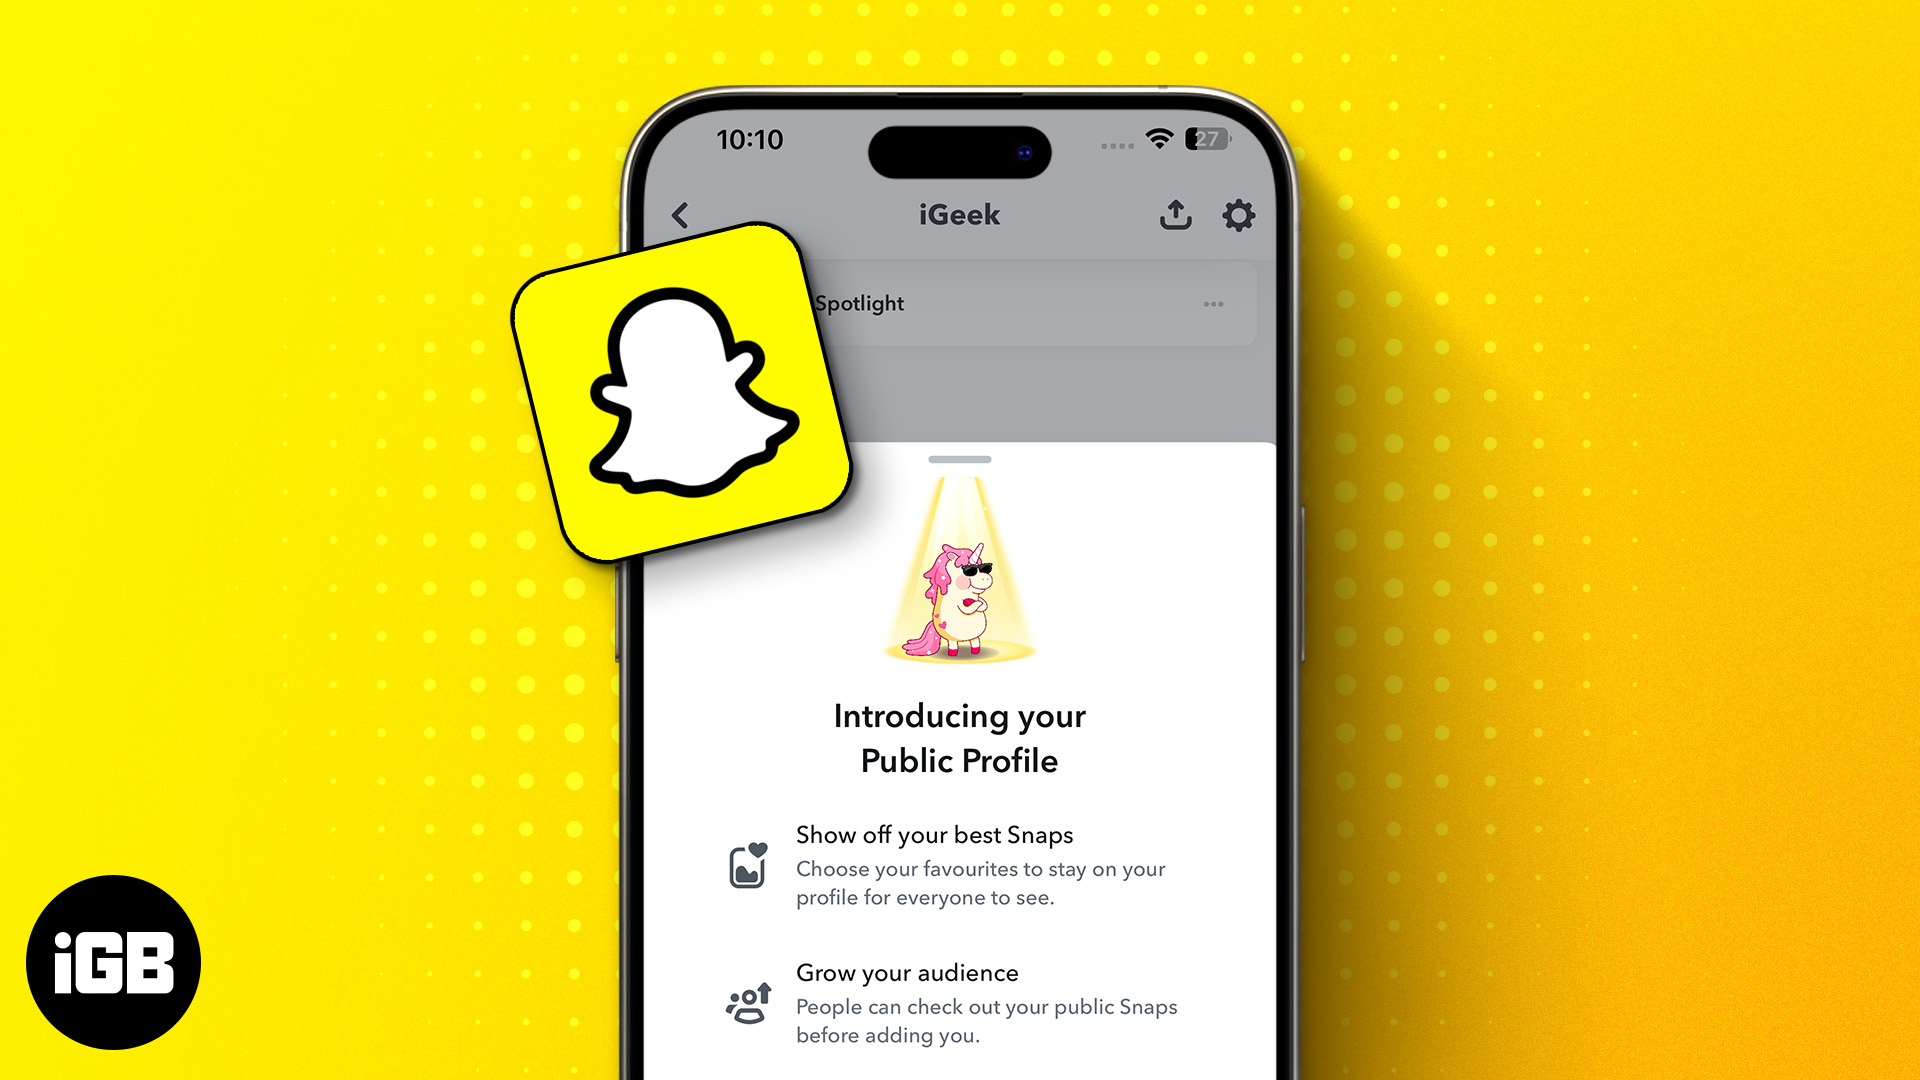 How to make a Public Profile on Snapchat